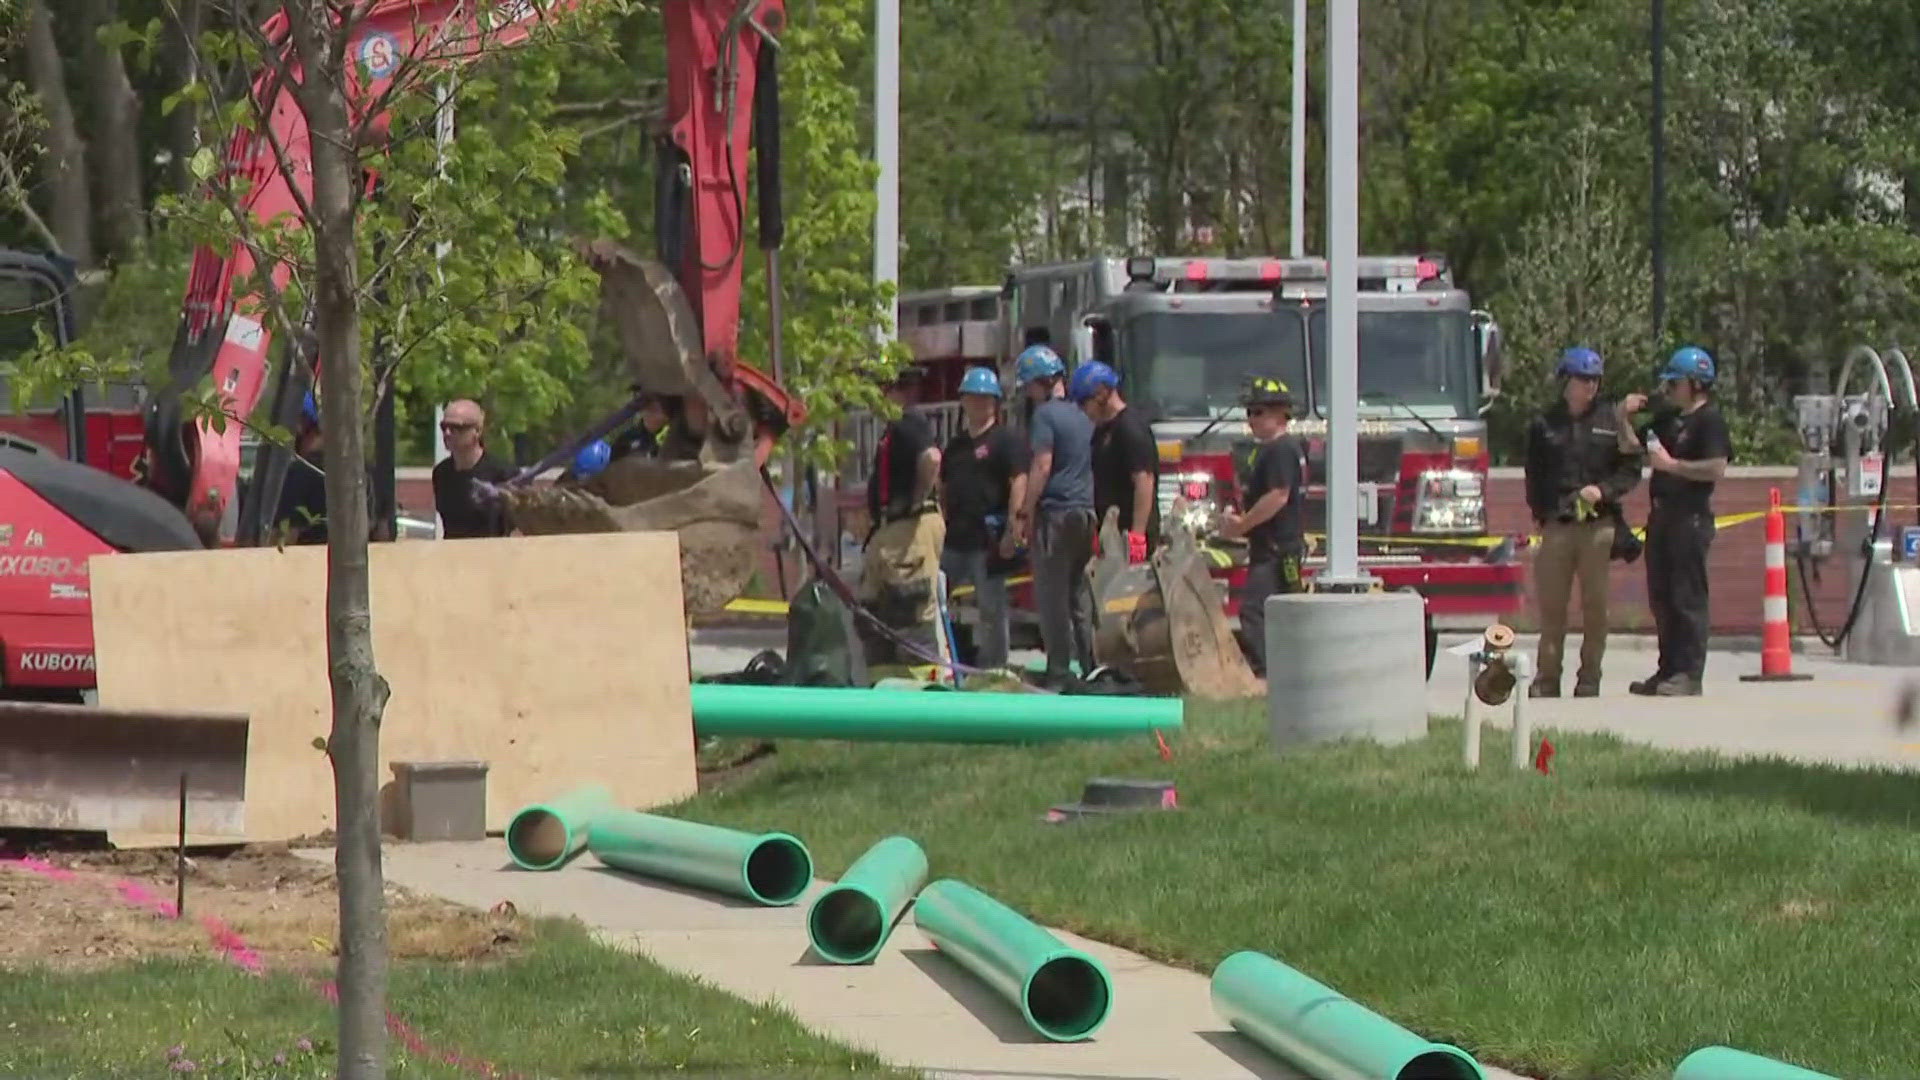 A spokesperson with the Noblesville Fire Department told 13News a 22-year-old contractor was installing water pipes when the collapse happened.